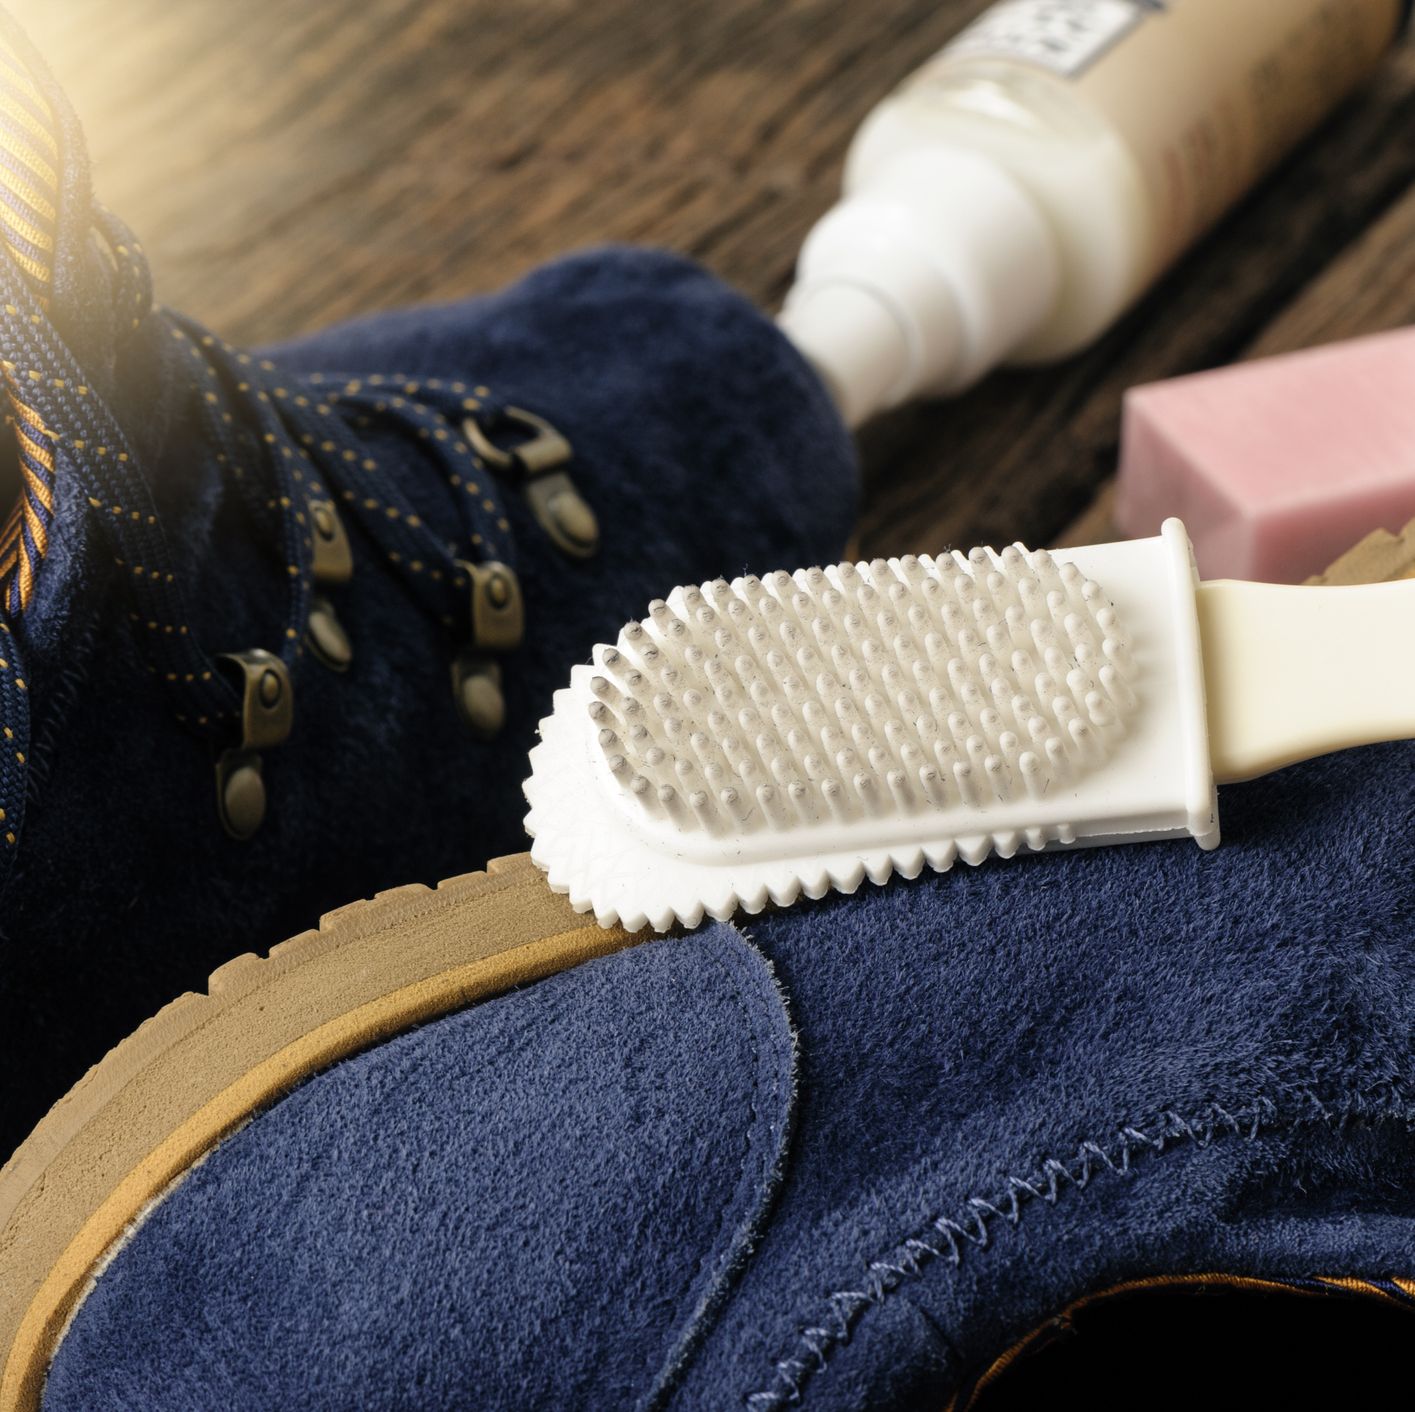 Hack To Clean Suede Shoes With Micellar Water Goes Viral